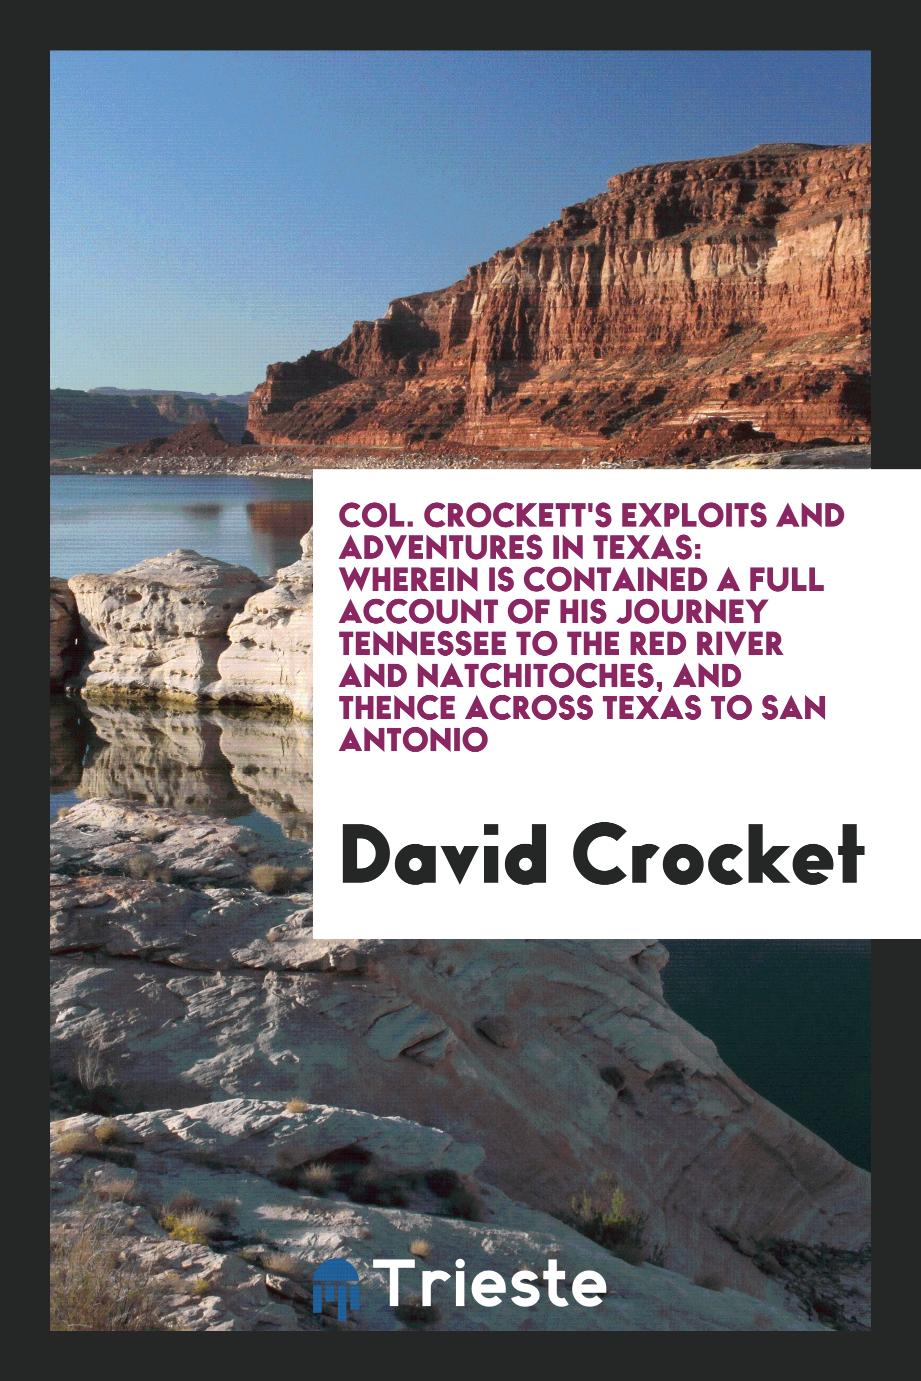 Col. Crockett's exploits and adventures in Texas: wherein is contained a full account of his journey Tennessee to the red river and natchitoches, and thence across Texas to San Antonio